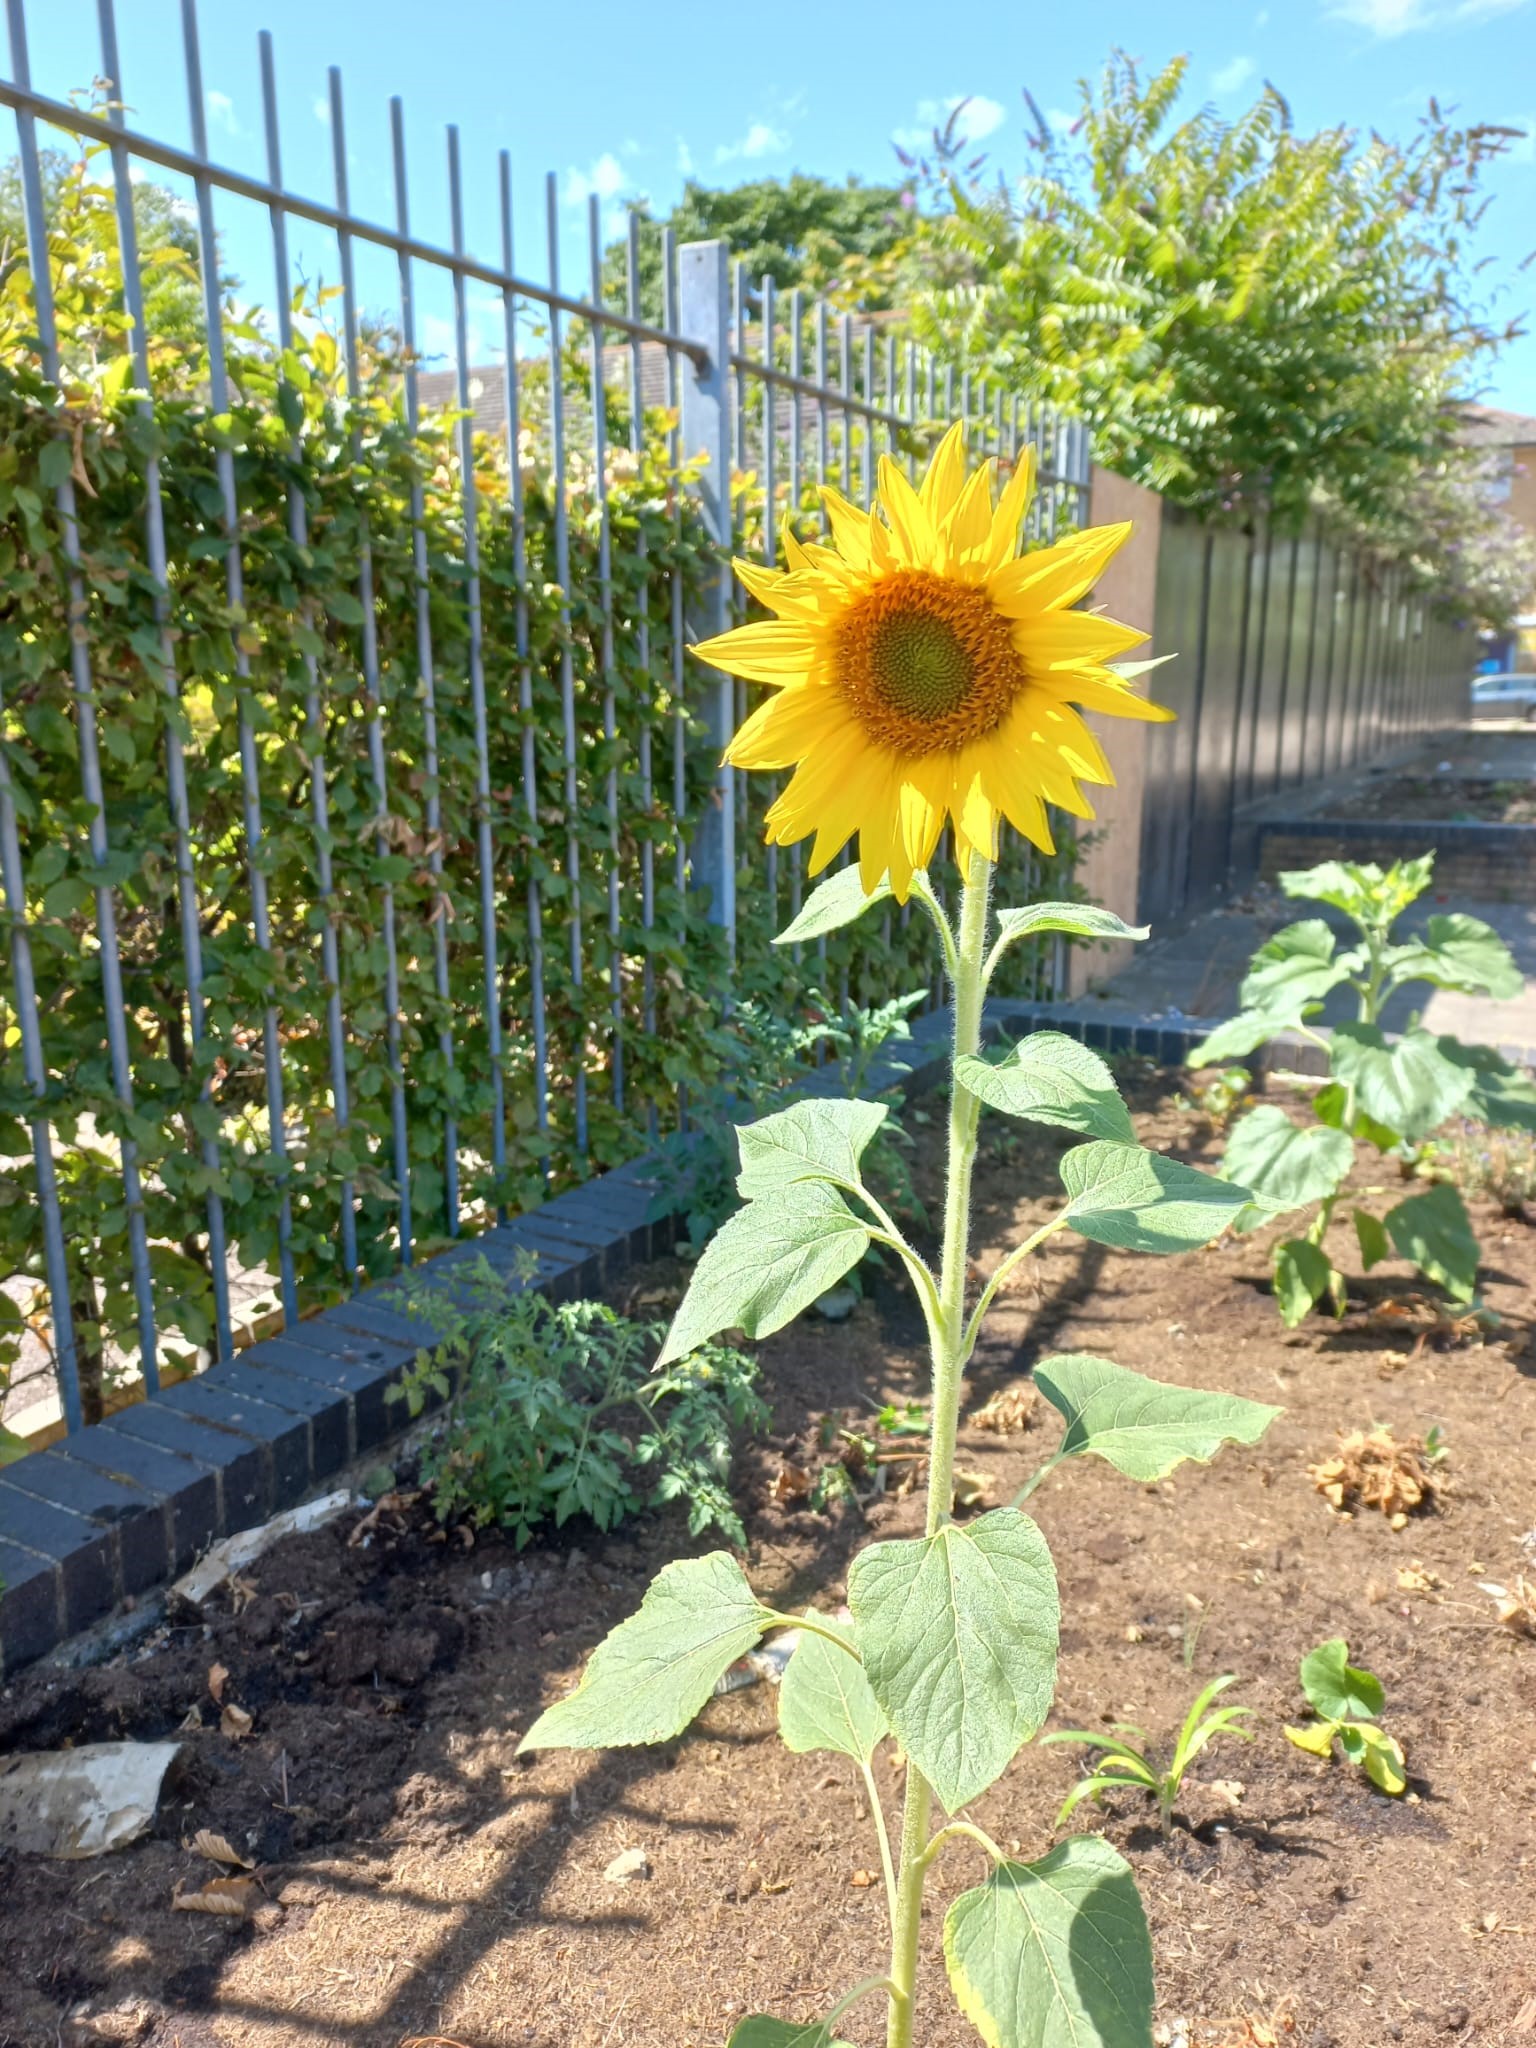 Sunflower from free planting project run by beckton community projects